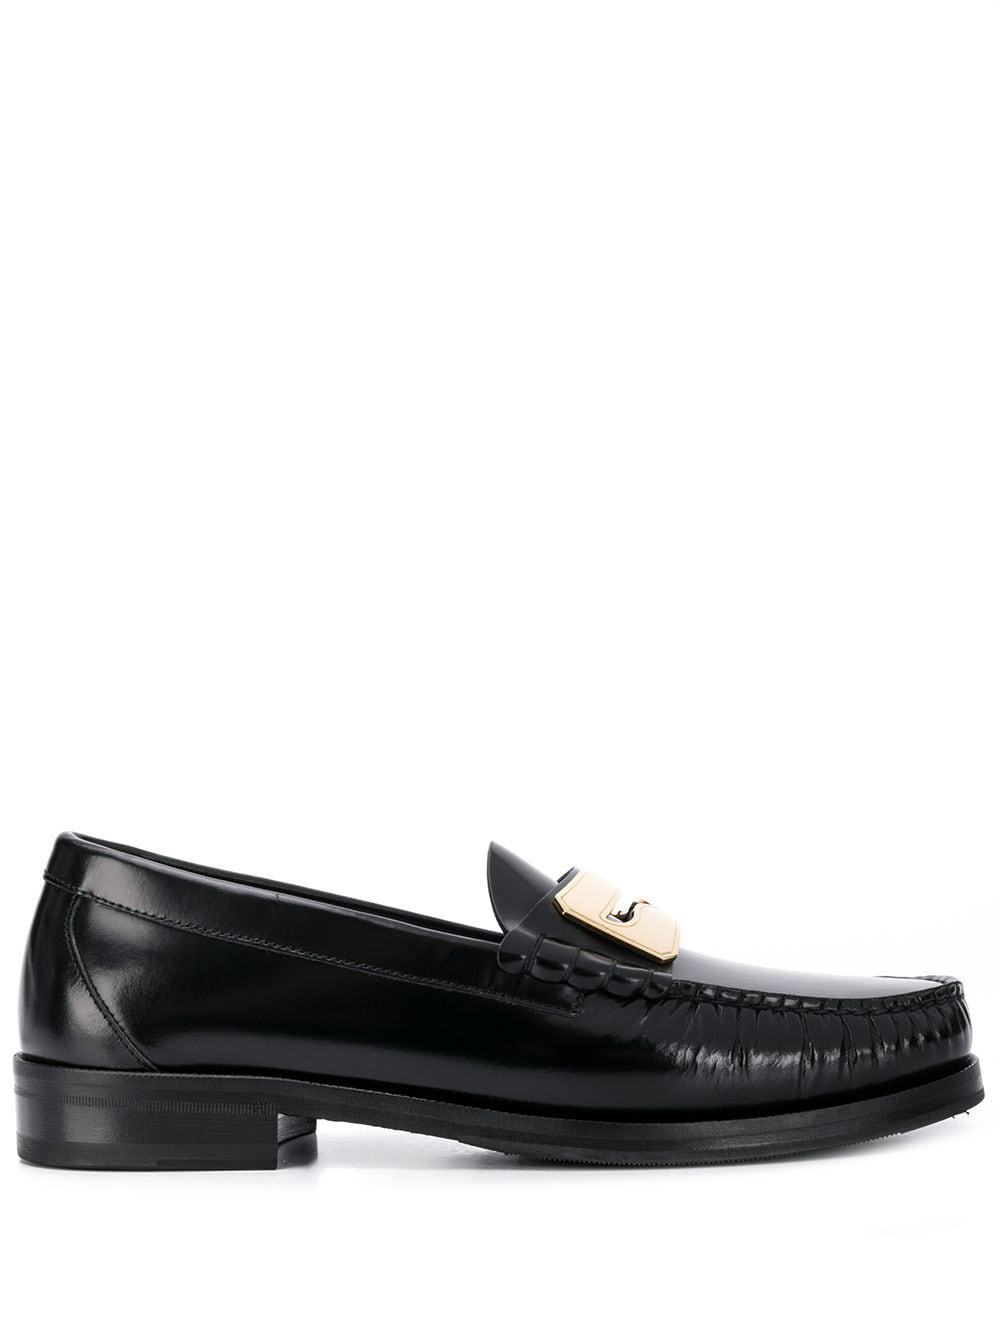 plaque embellished loafers by BUSCEMI